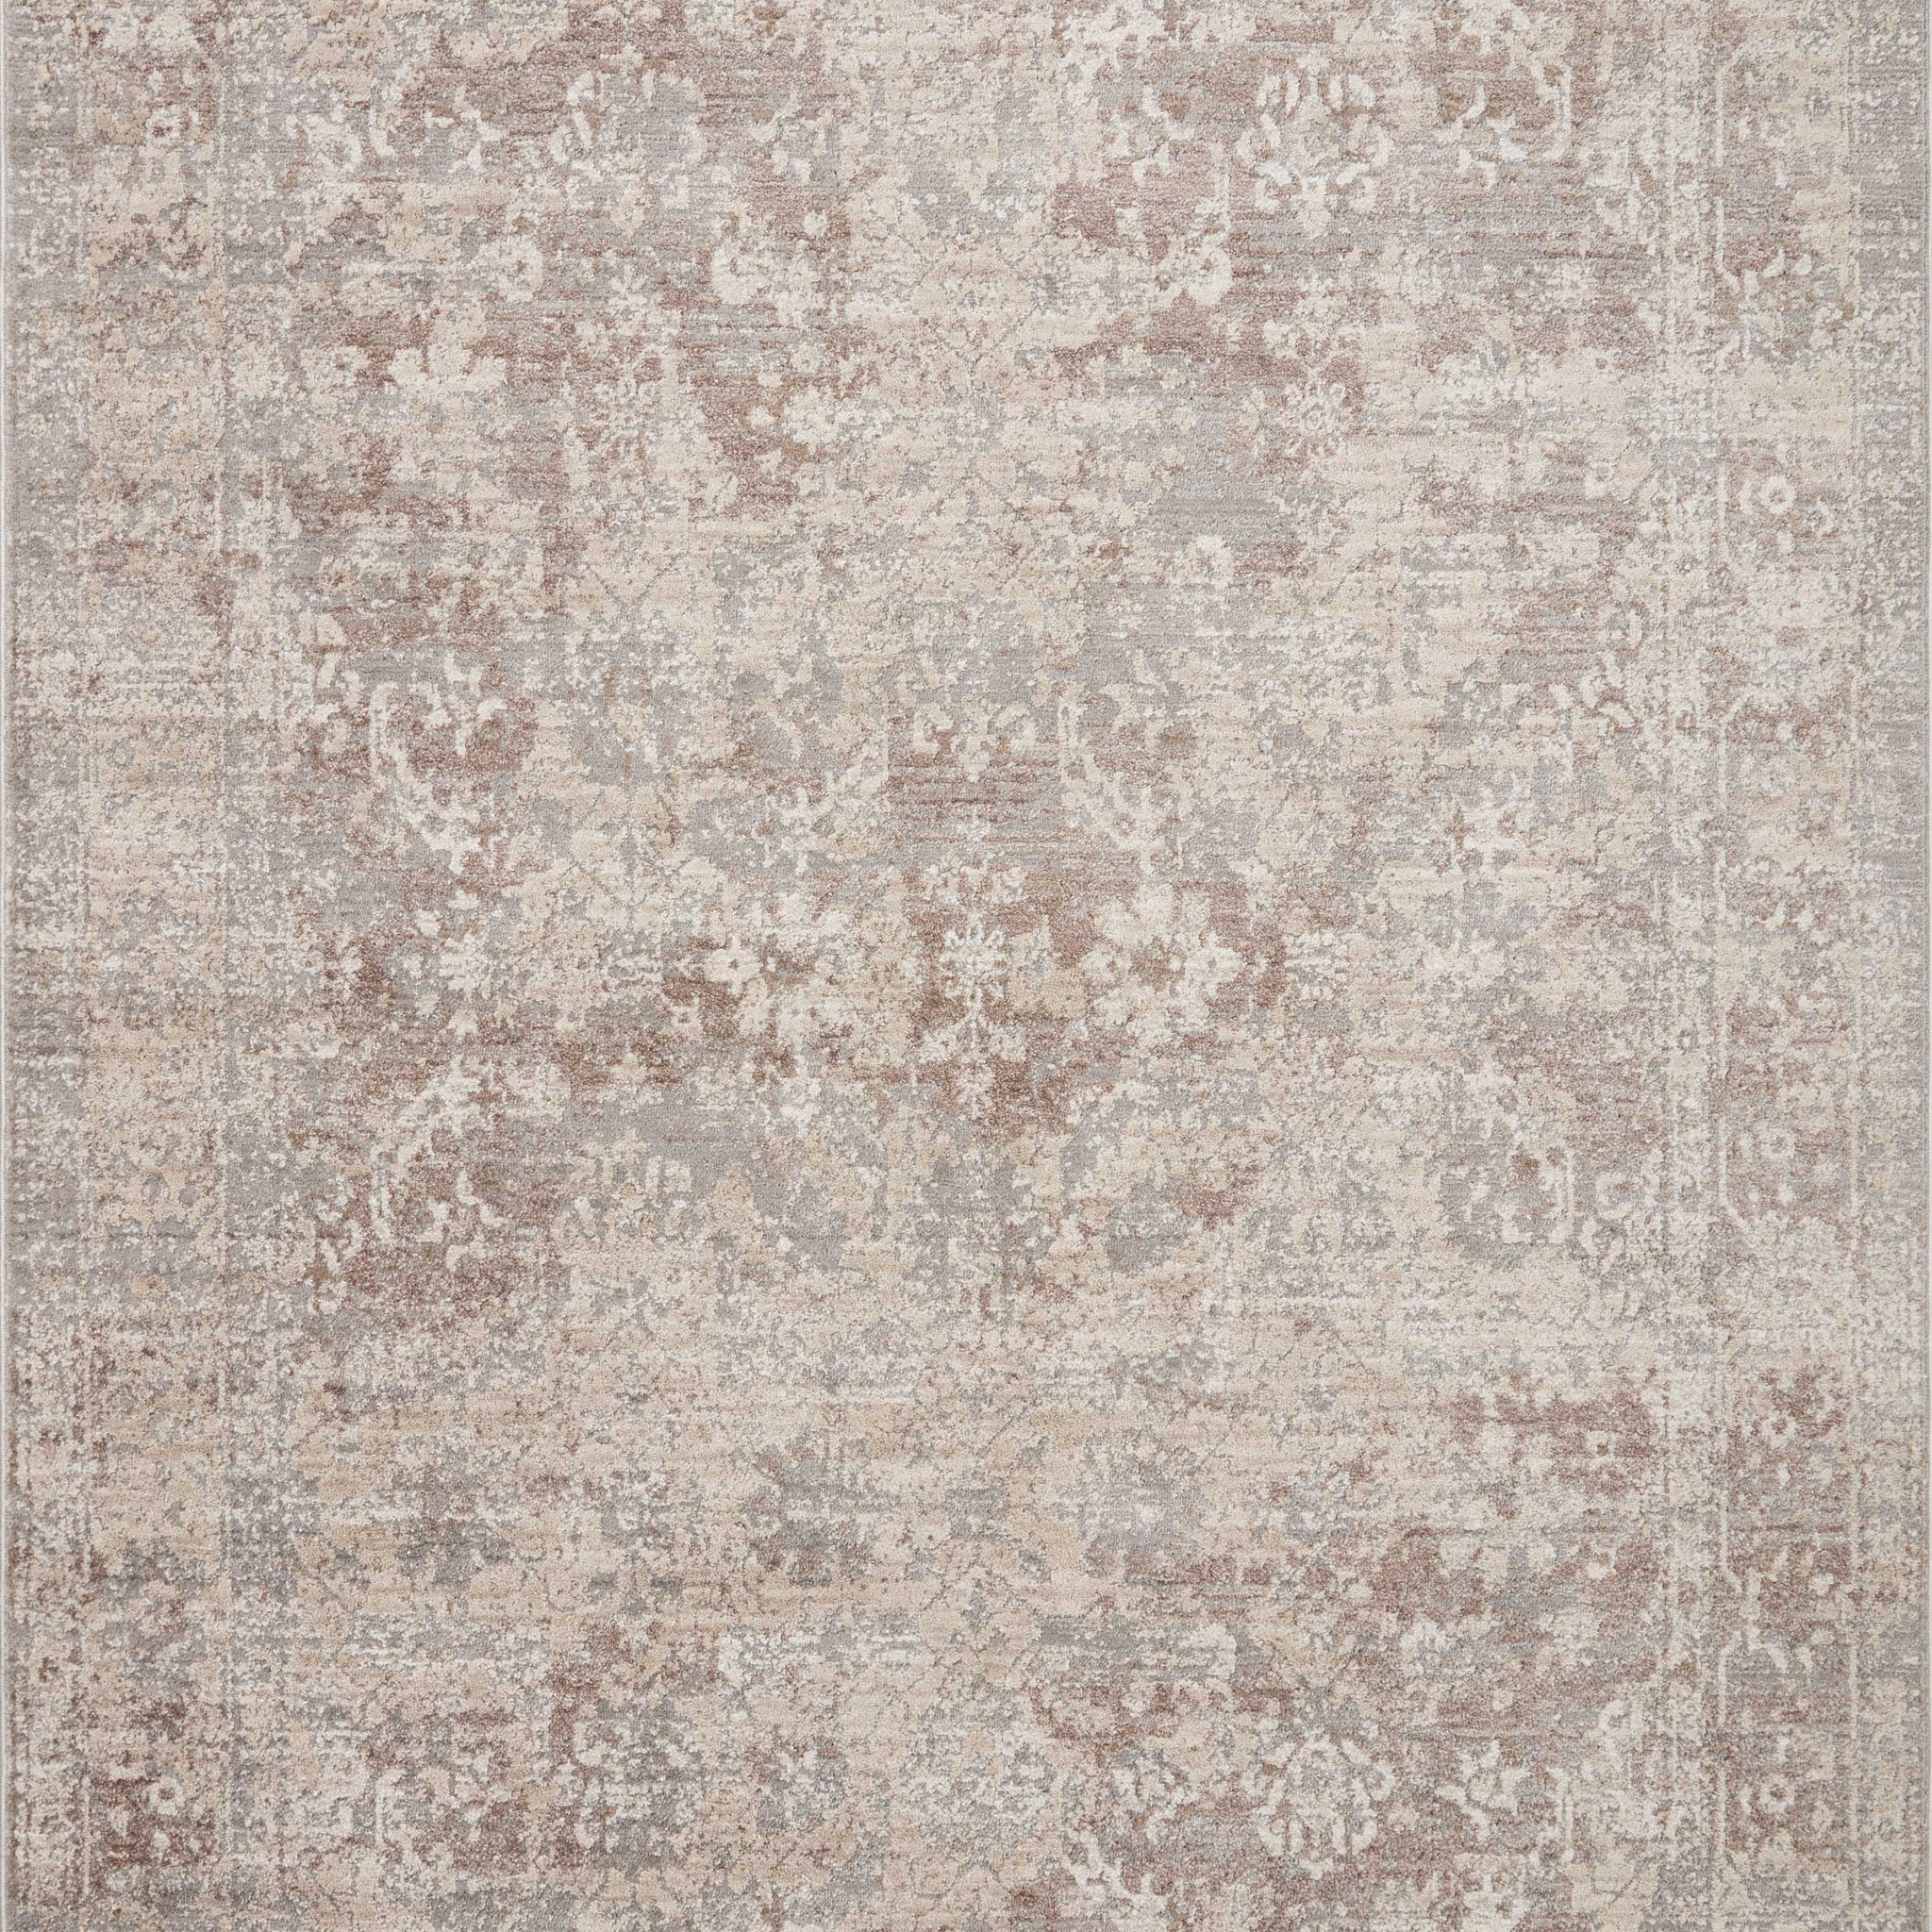 Loloi Sonnet Silver / Natural 11'-6" x 15' Area Rug